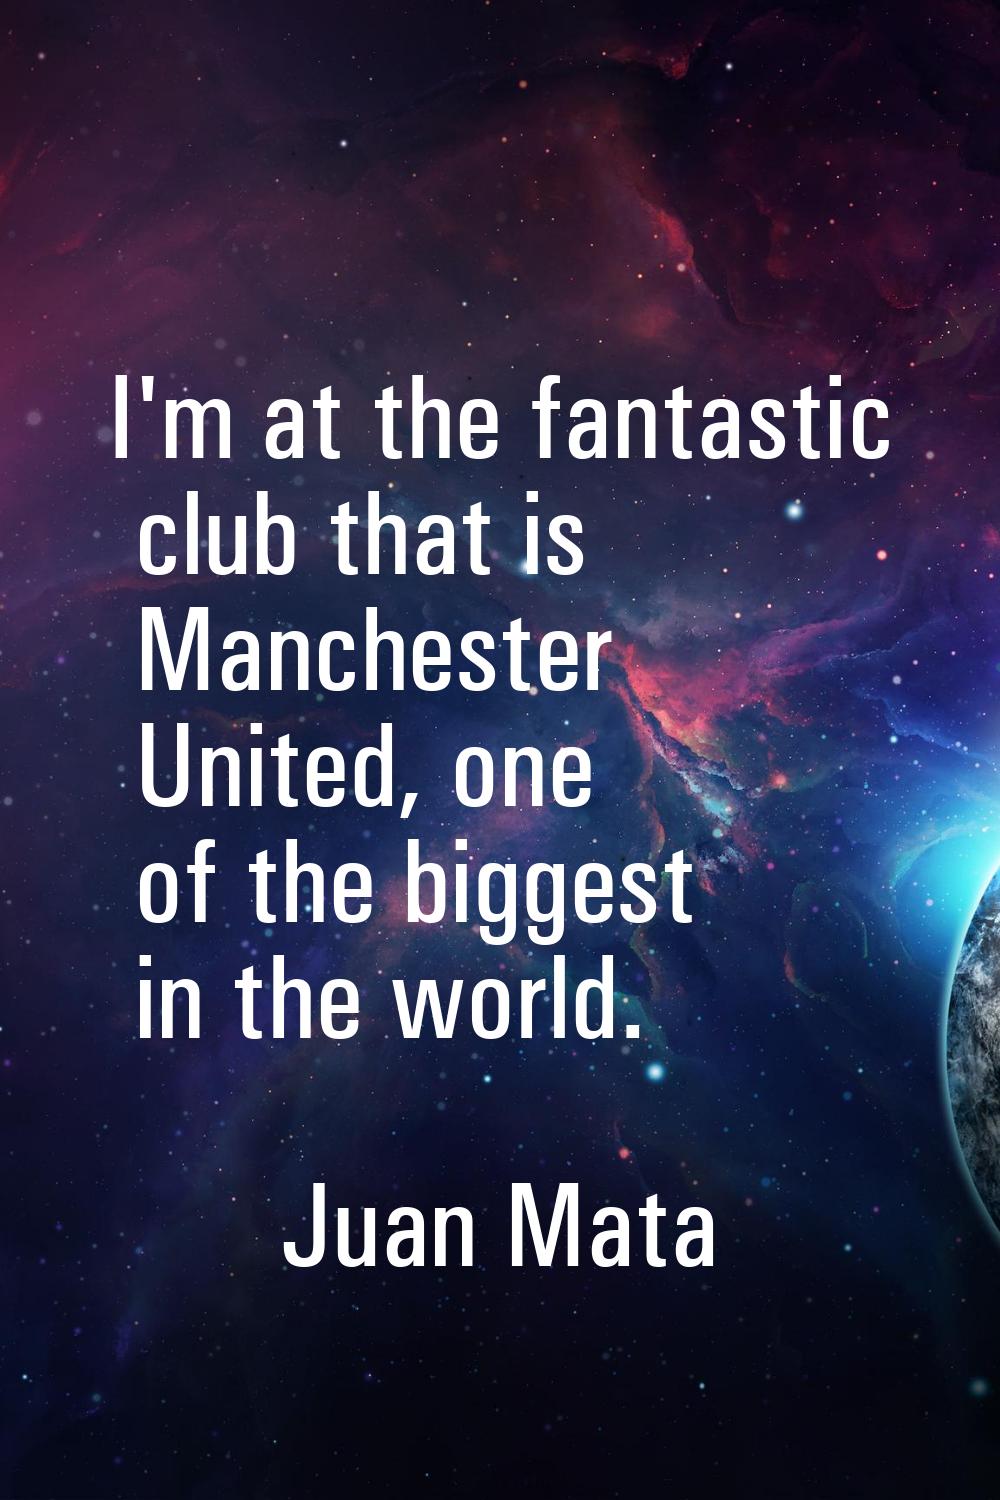 I'm at the fantastic club that is Manchester United, one of the biggest in the world.